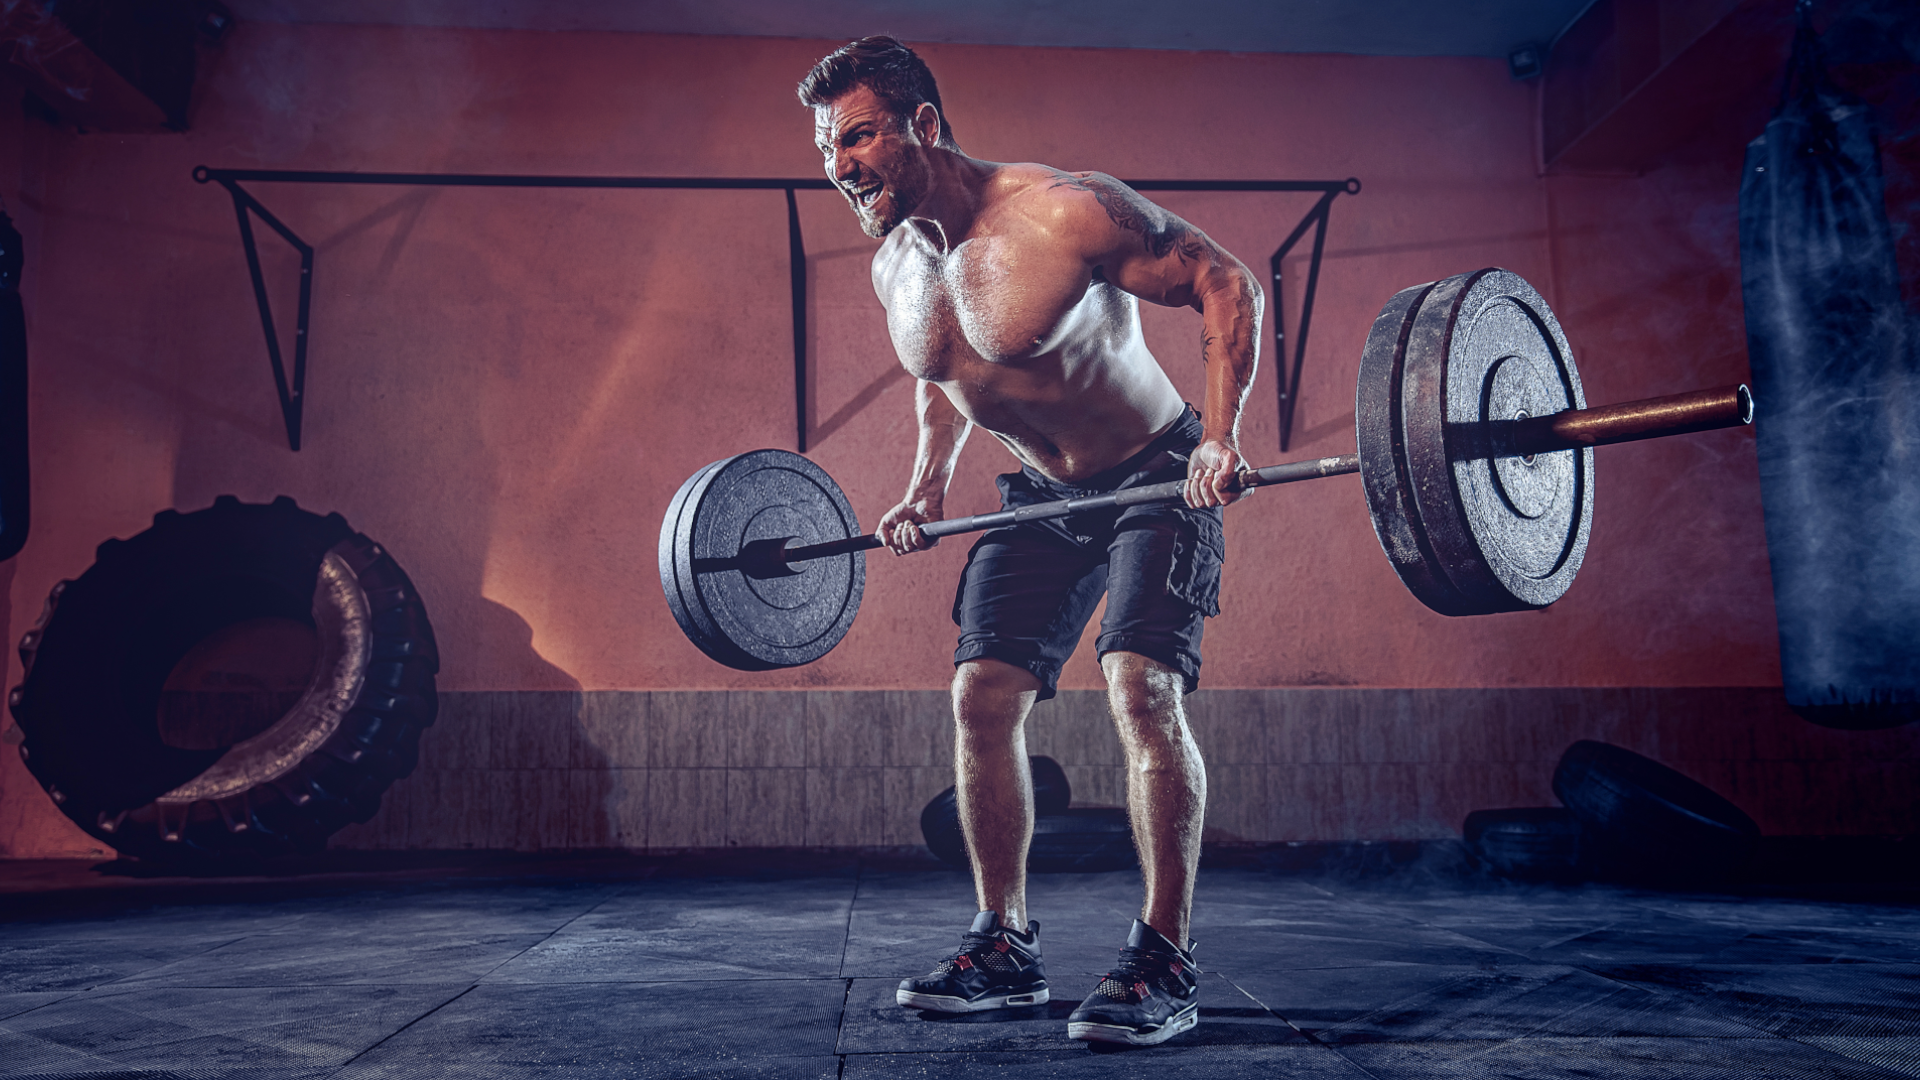 The Beginner's Guide To Proper Weight Lifting Form